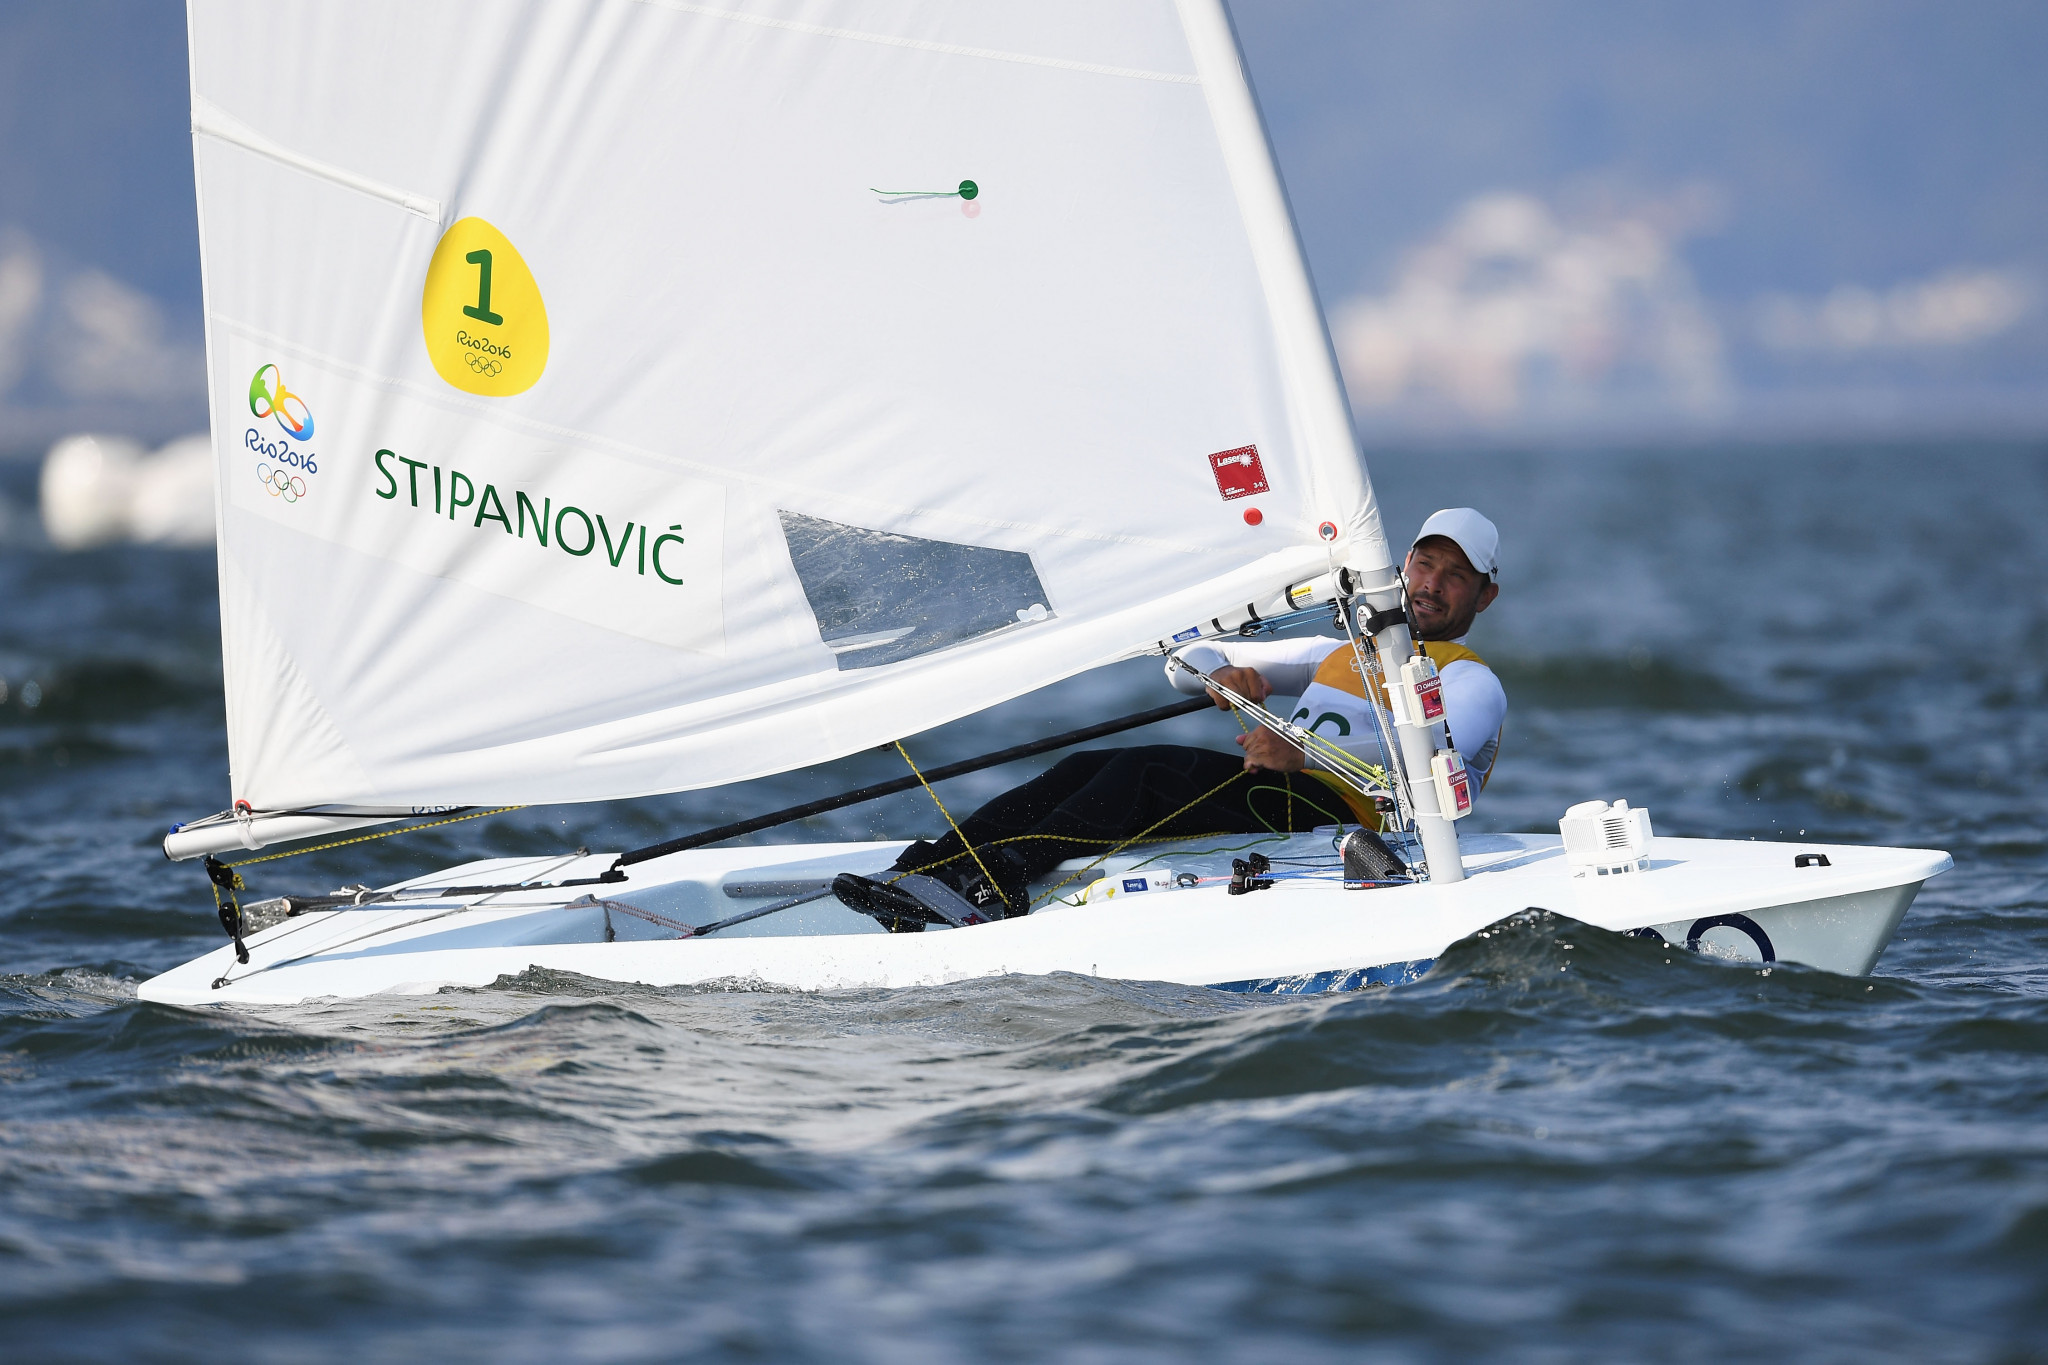 Alexander and Stipanovic share lead after day one of Laser Standard World Championships